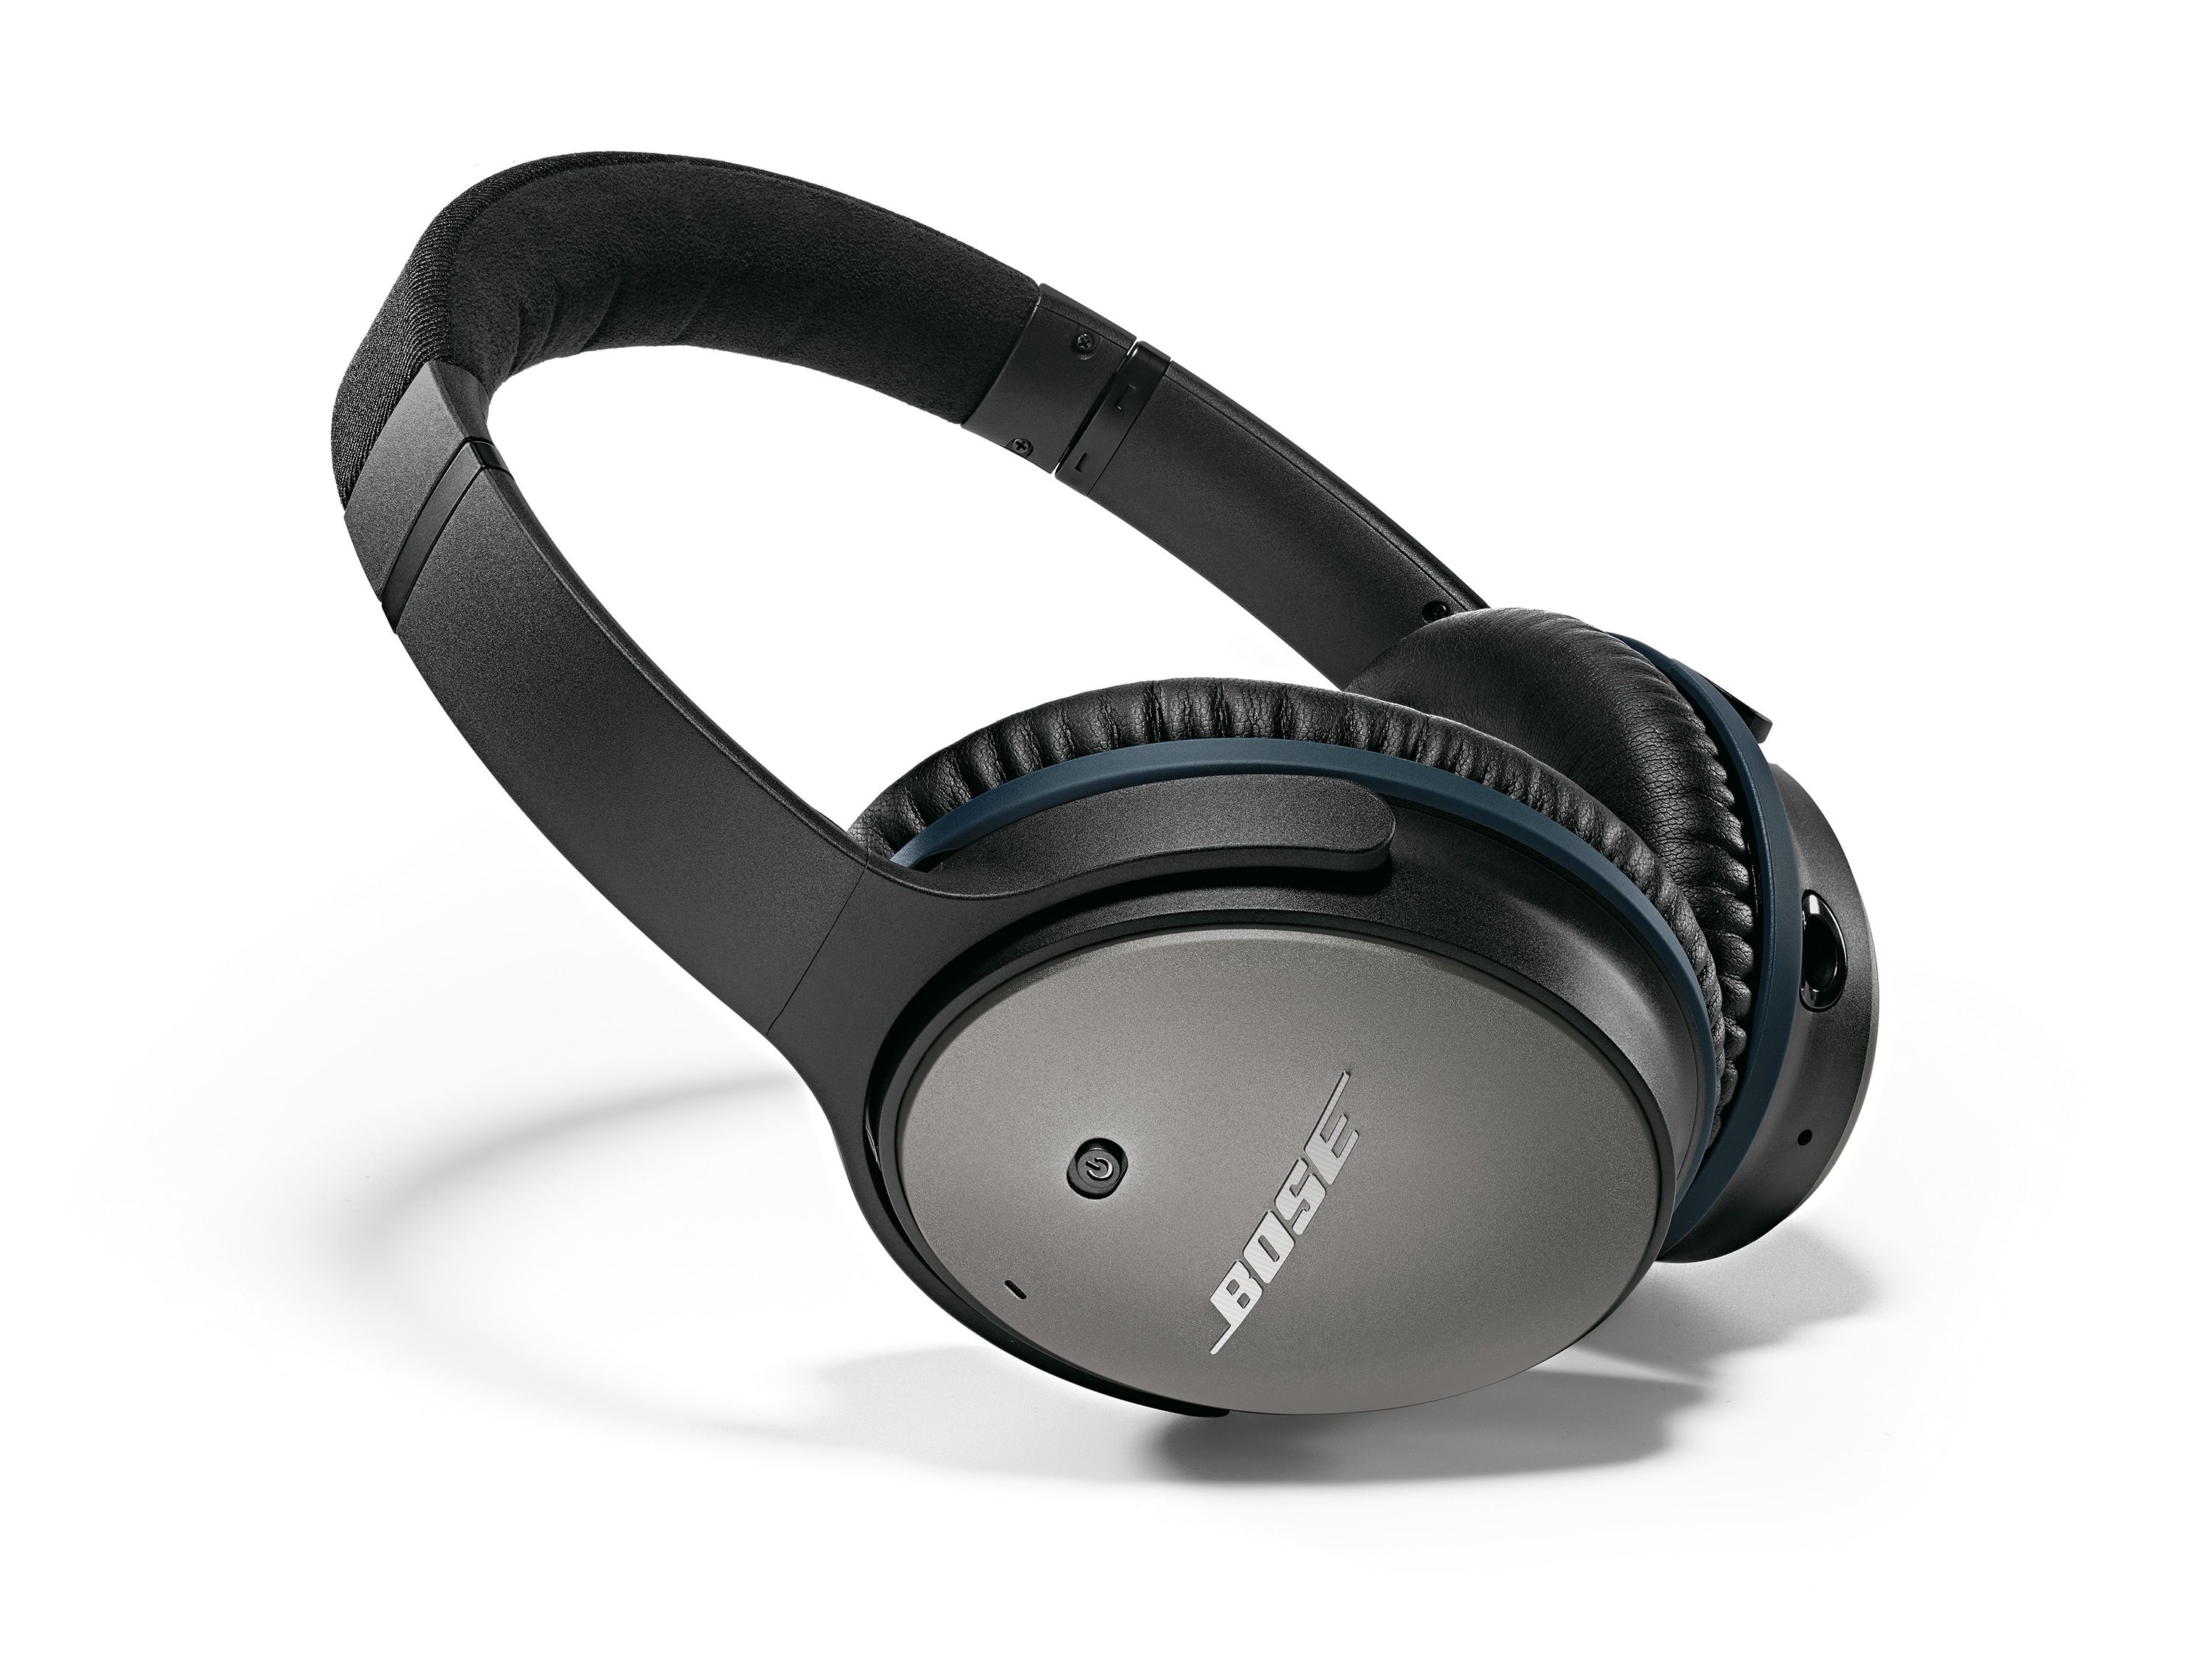 bose qc 25 noise cancelling headphones now out for preorder replacing qc 15 headphones image 1